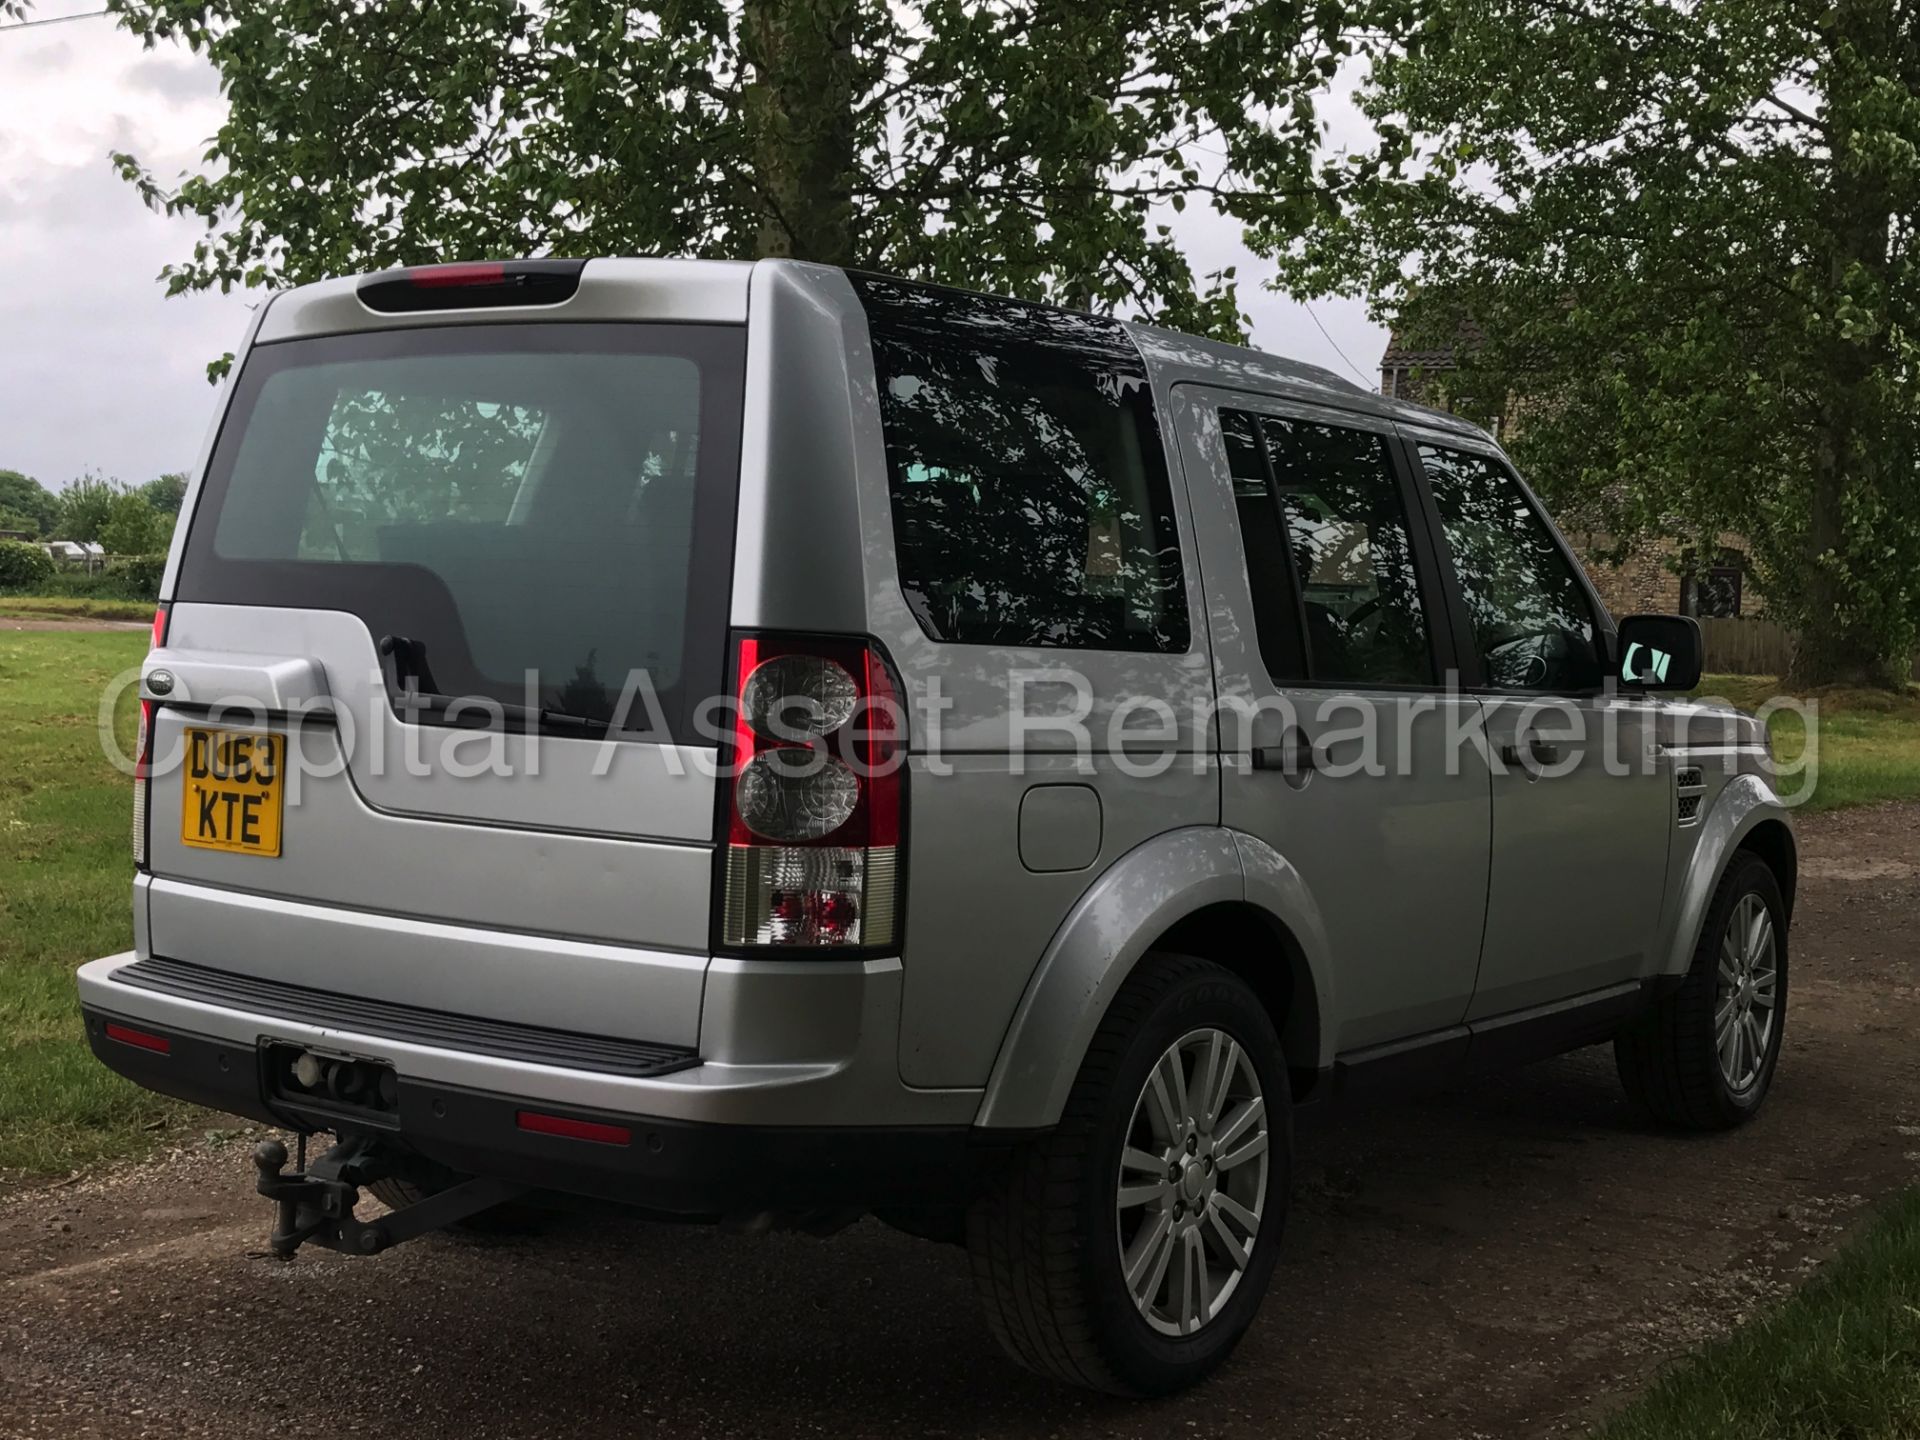 (On sale) LAND ROVER DISCOVERY 4 (2014 MODEL) '3.0 SDV6 -AUTO- 255 BHP - 7 SEATER'(1 OWNER FROM NEW) - Image 6 of 42